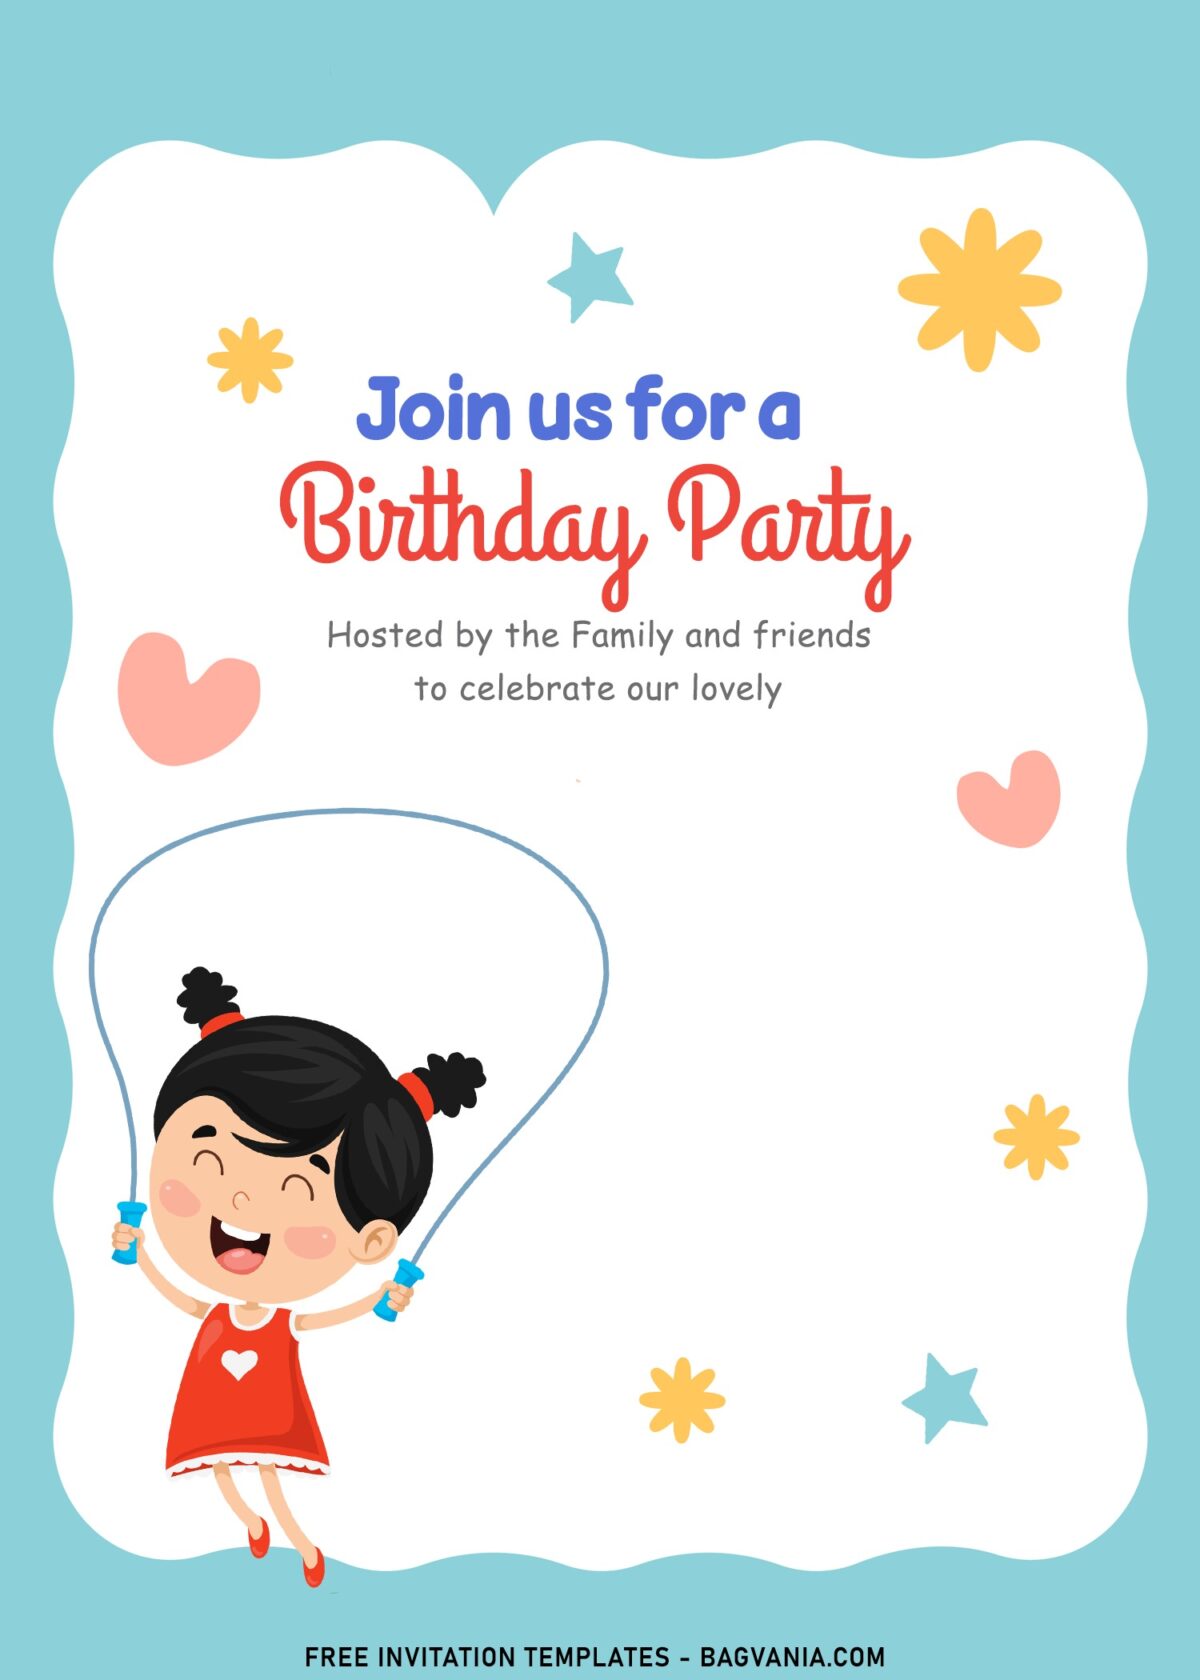 9+ Playful And Adorable Kids Birthday Invitation Templates For All Ages with adorable little girl is playing rope skipping